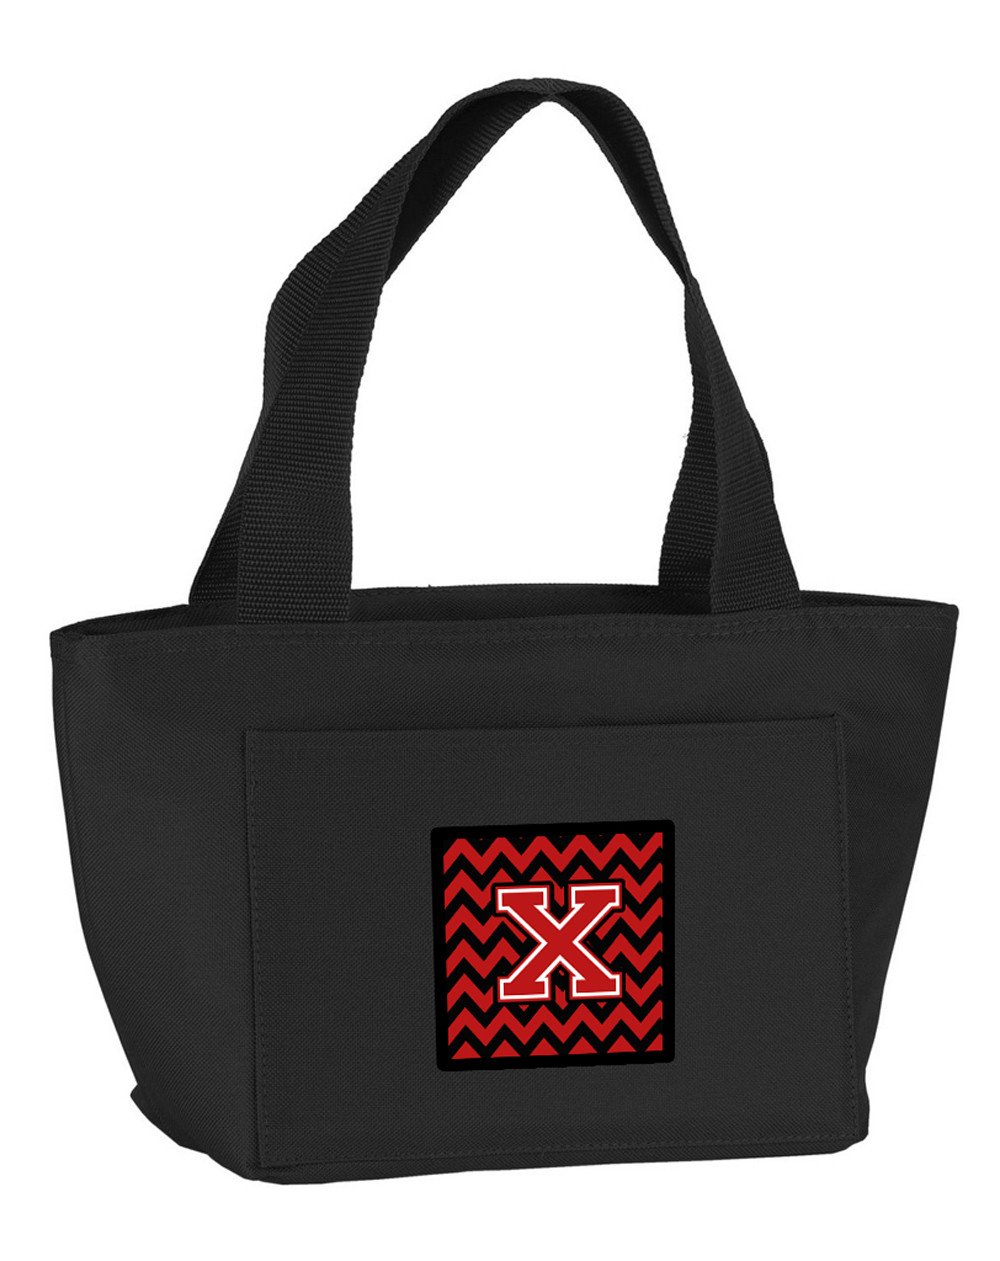 Letter X Chevron Black and Red   Lunch Bag CJ1047-XBK-8808 by Caroline&#39;s Treasures